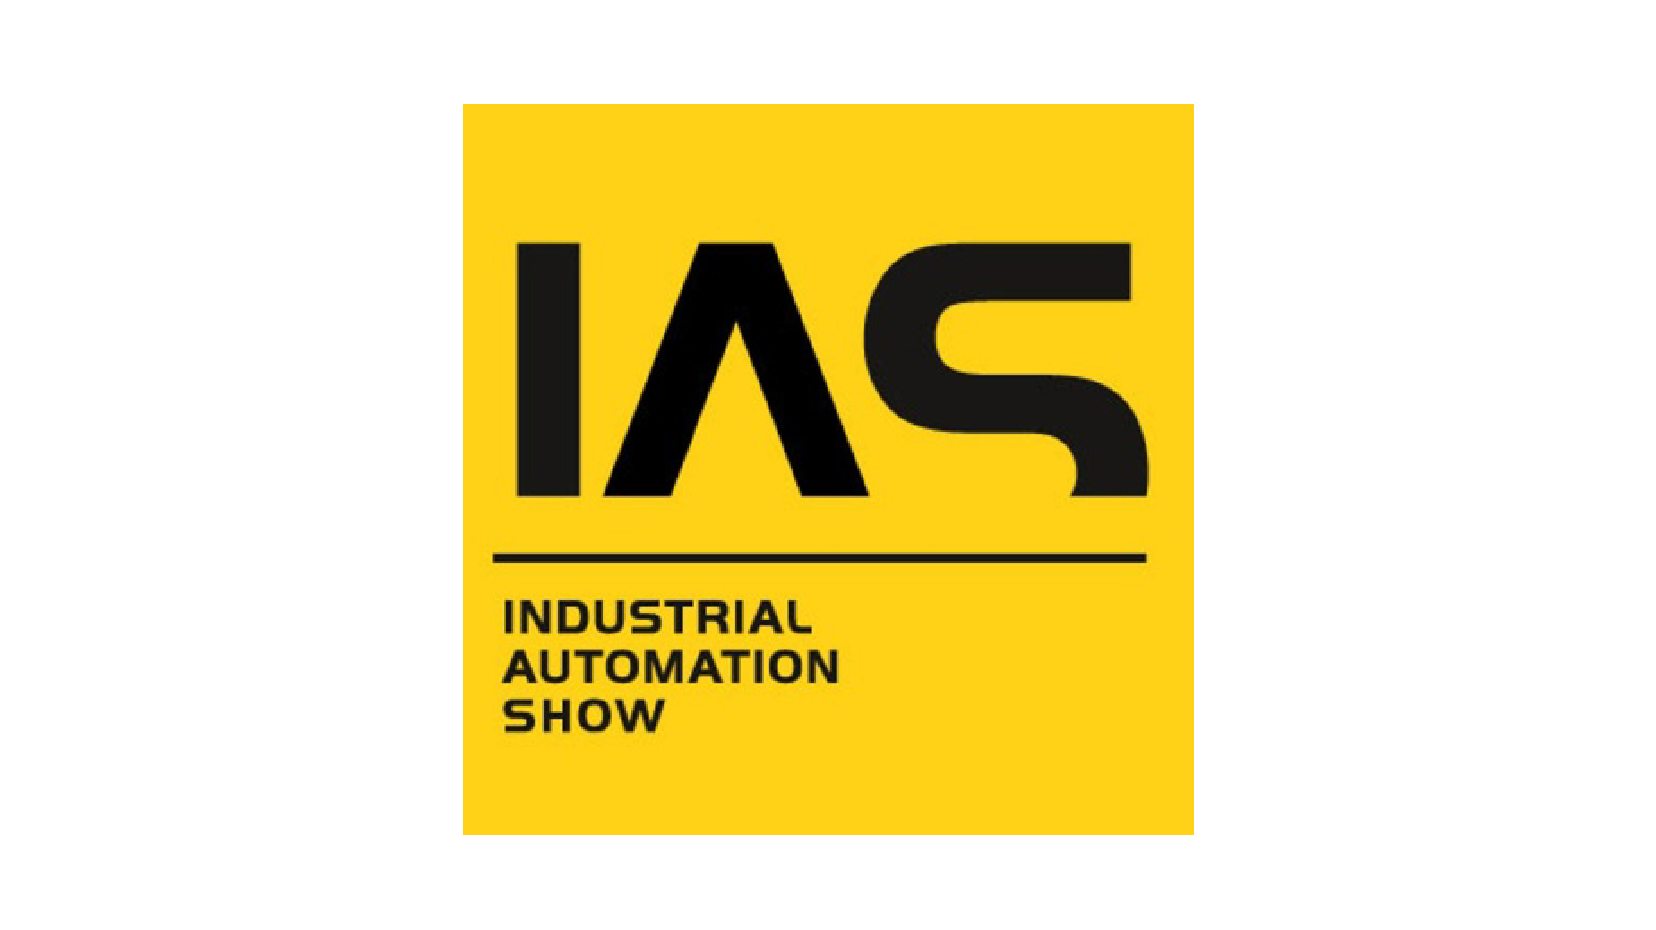 Black and yellow logo of the Industrial Automation Show (IAS).